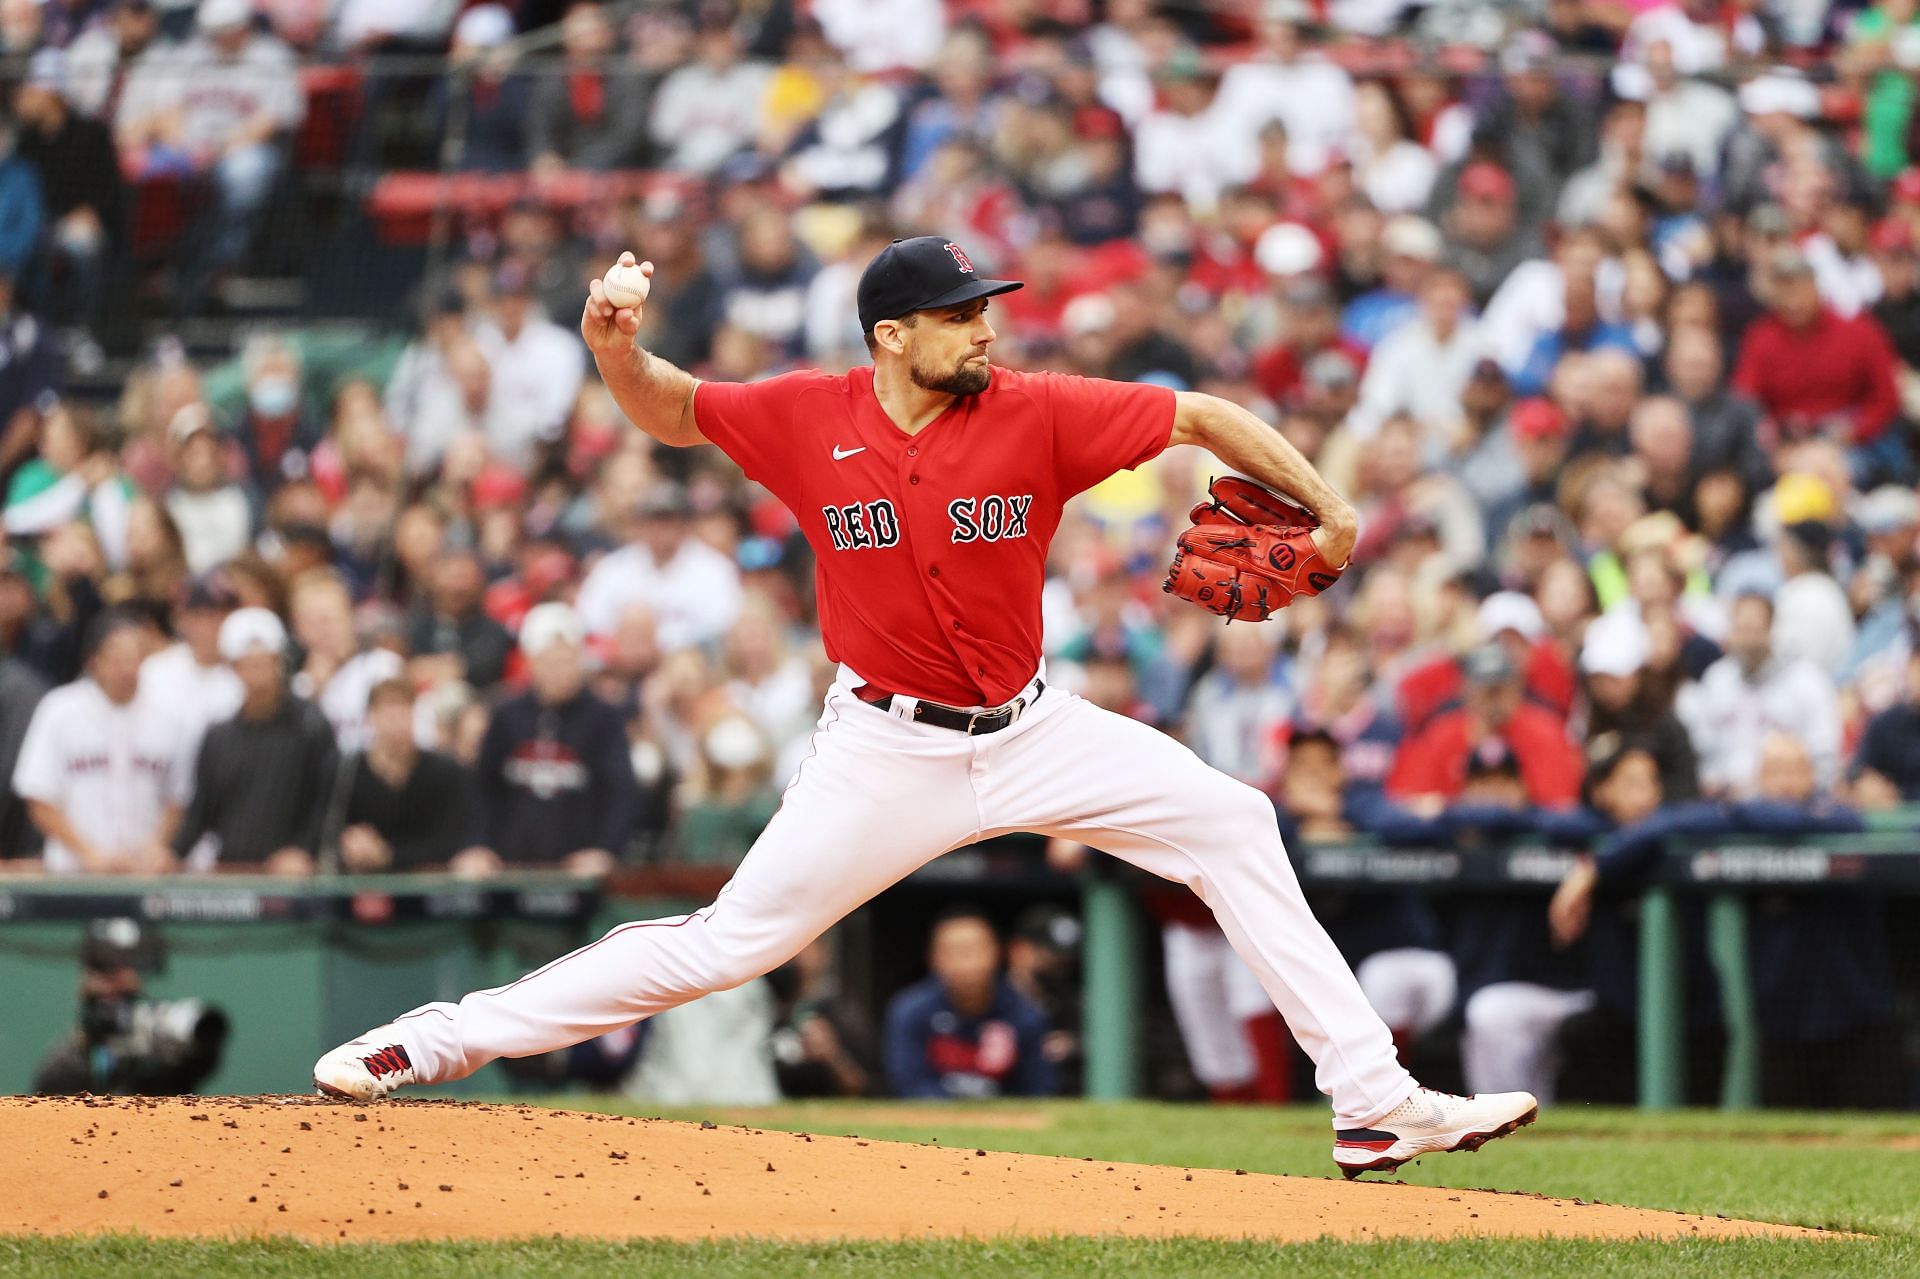 Nathan Eovaldi leads the Red Sox Pitchers into 2022